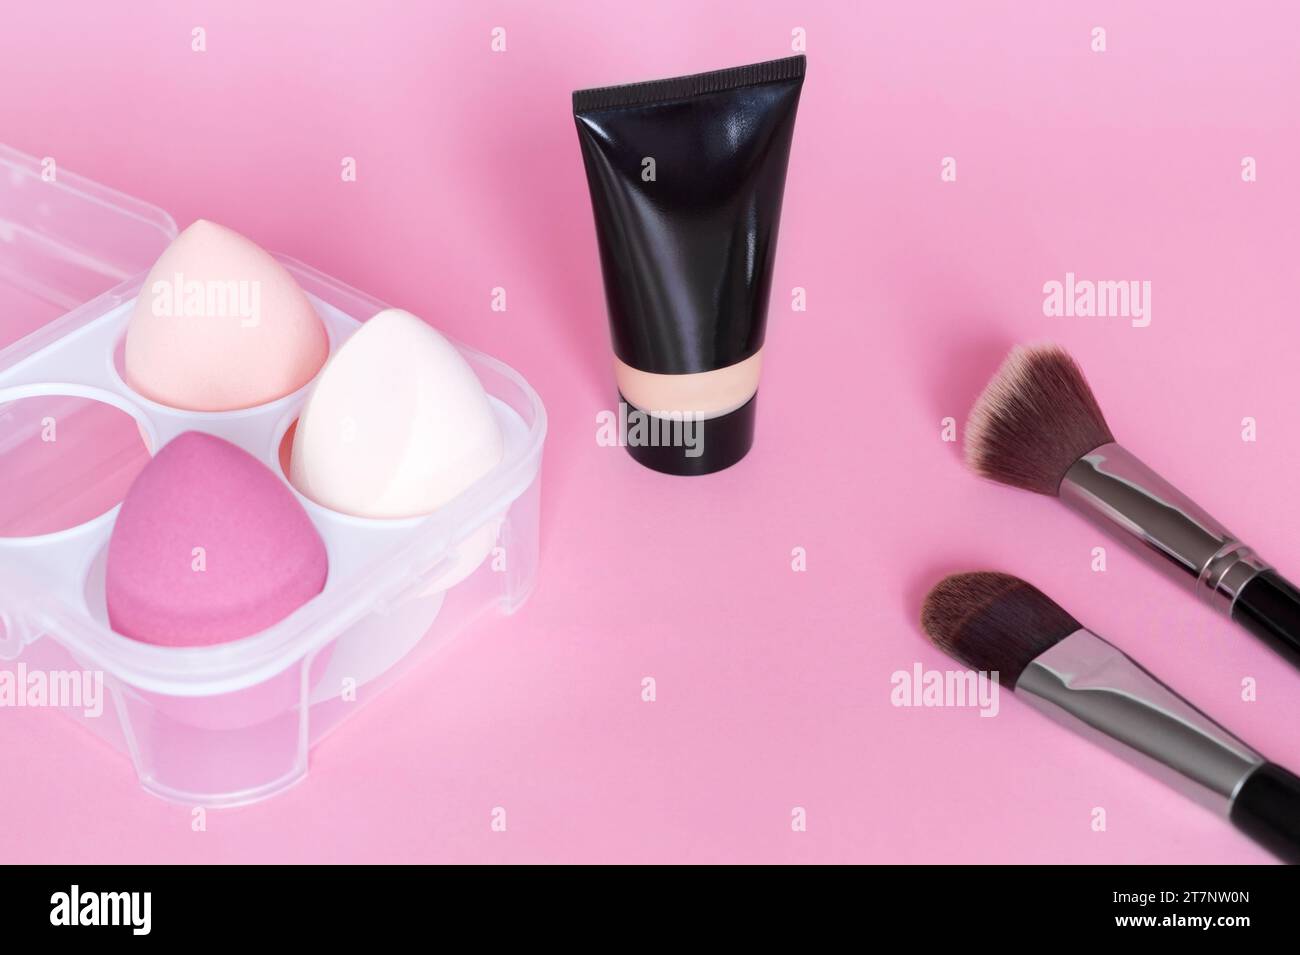 Makeup foundation, make up sponge and brush on pink background. Cosmetic tool concept. Beauty accessories. Stock Photo